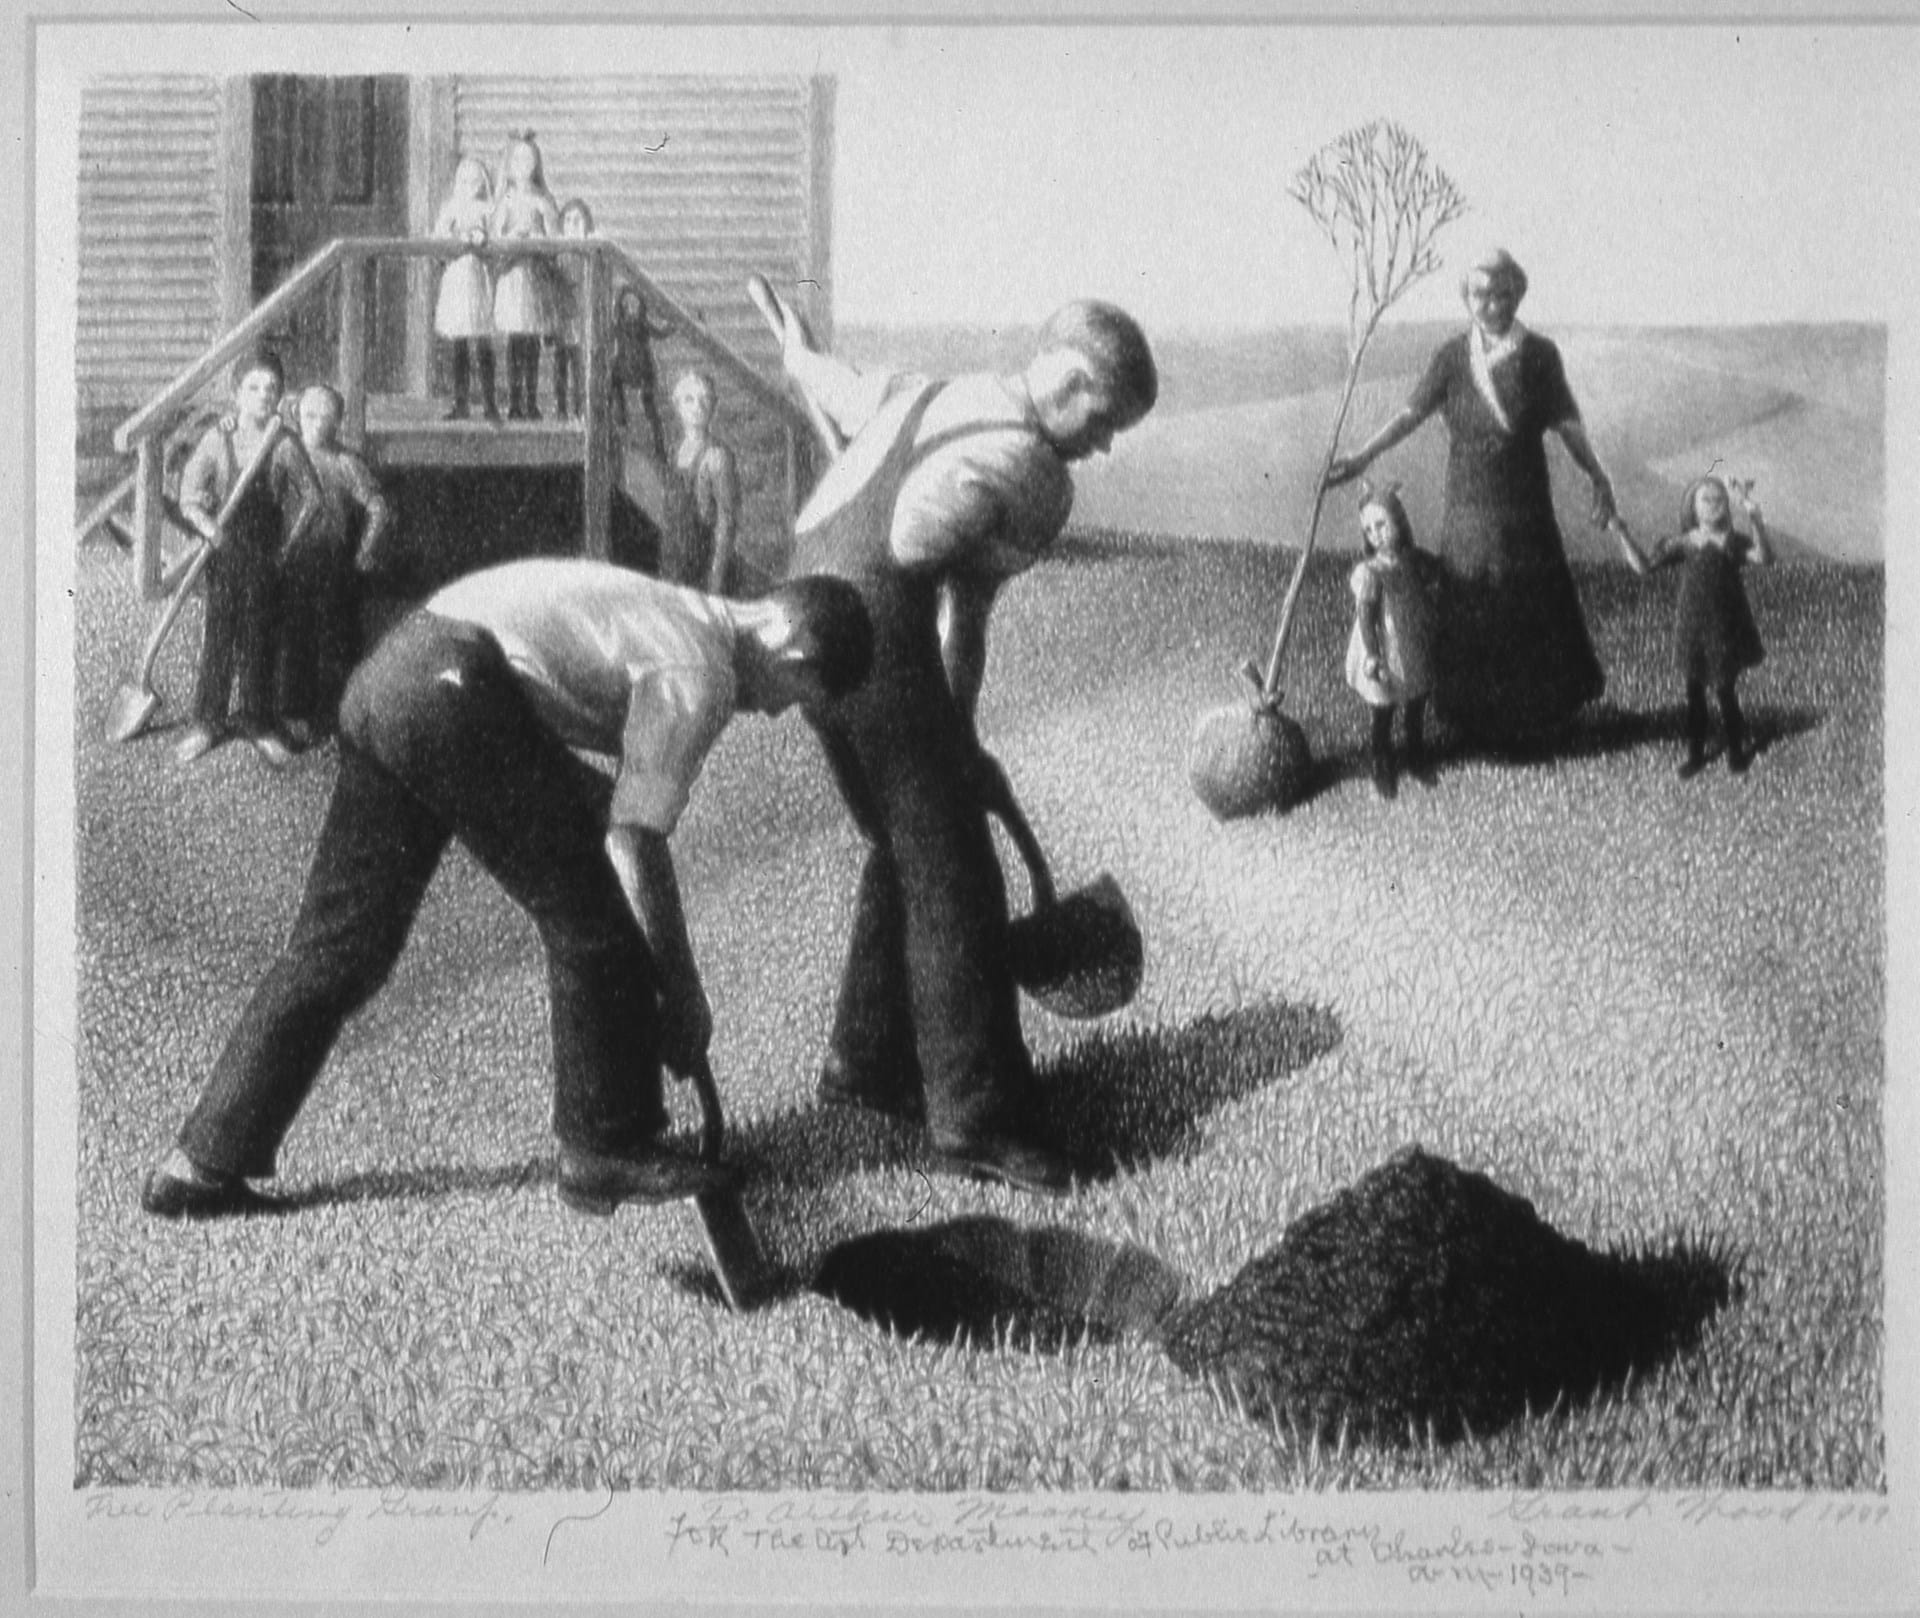 Tree Planting Group by Grant Wood